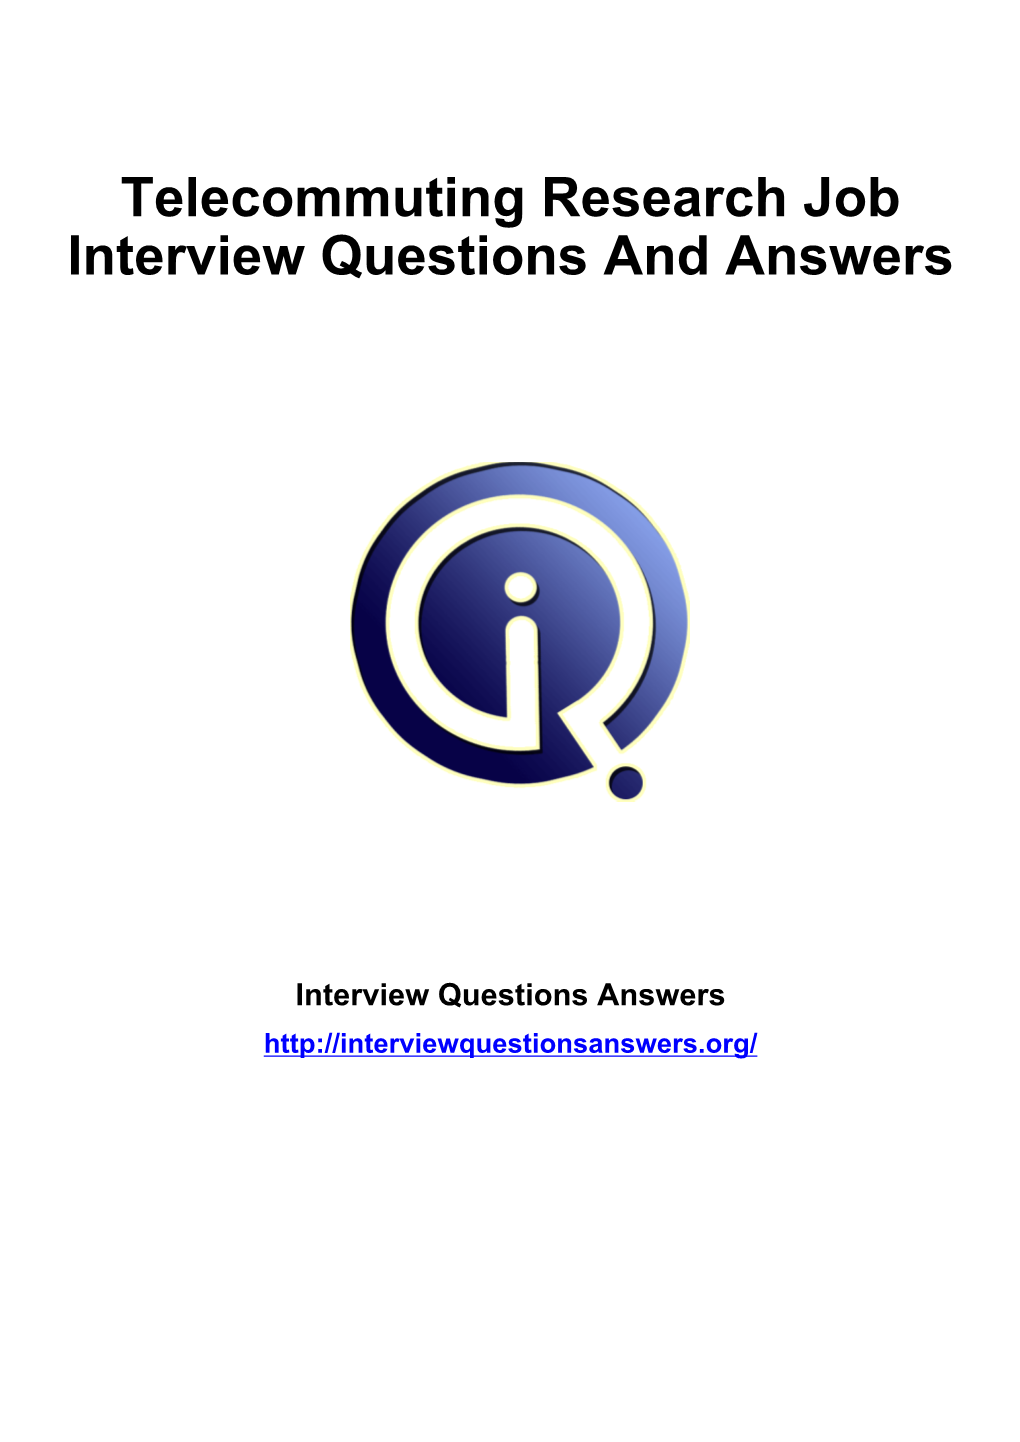 Telecommuting Research Job Interview Questions and Answers